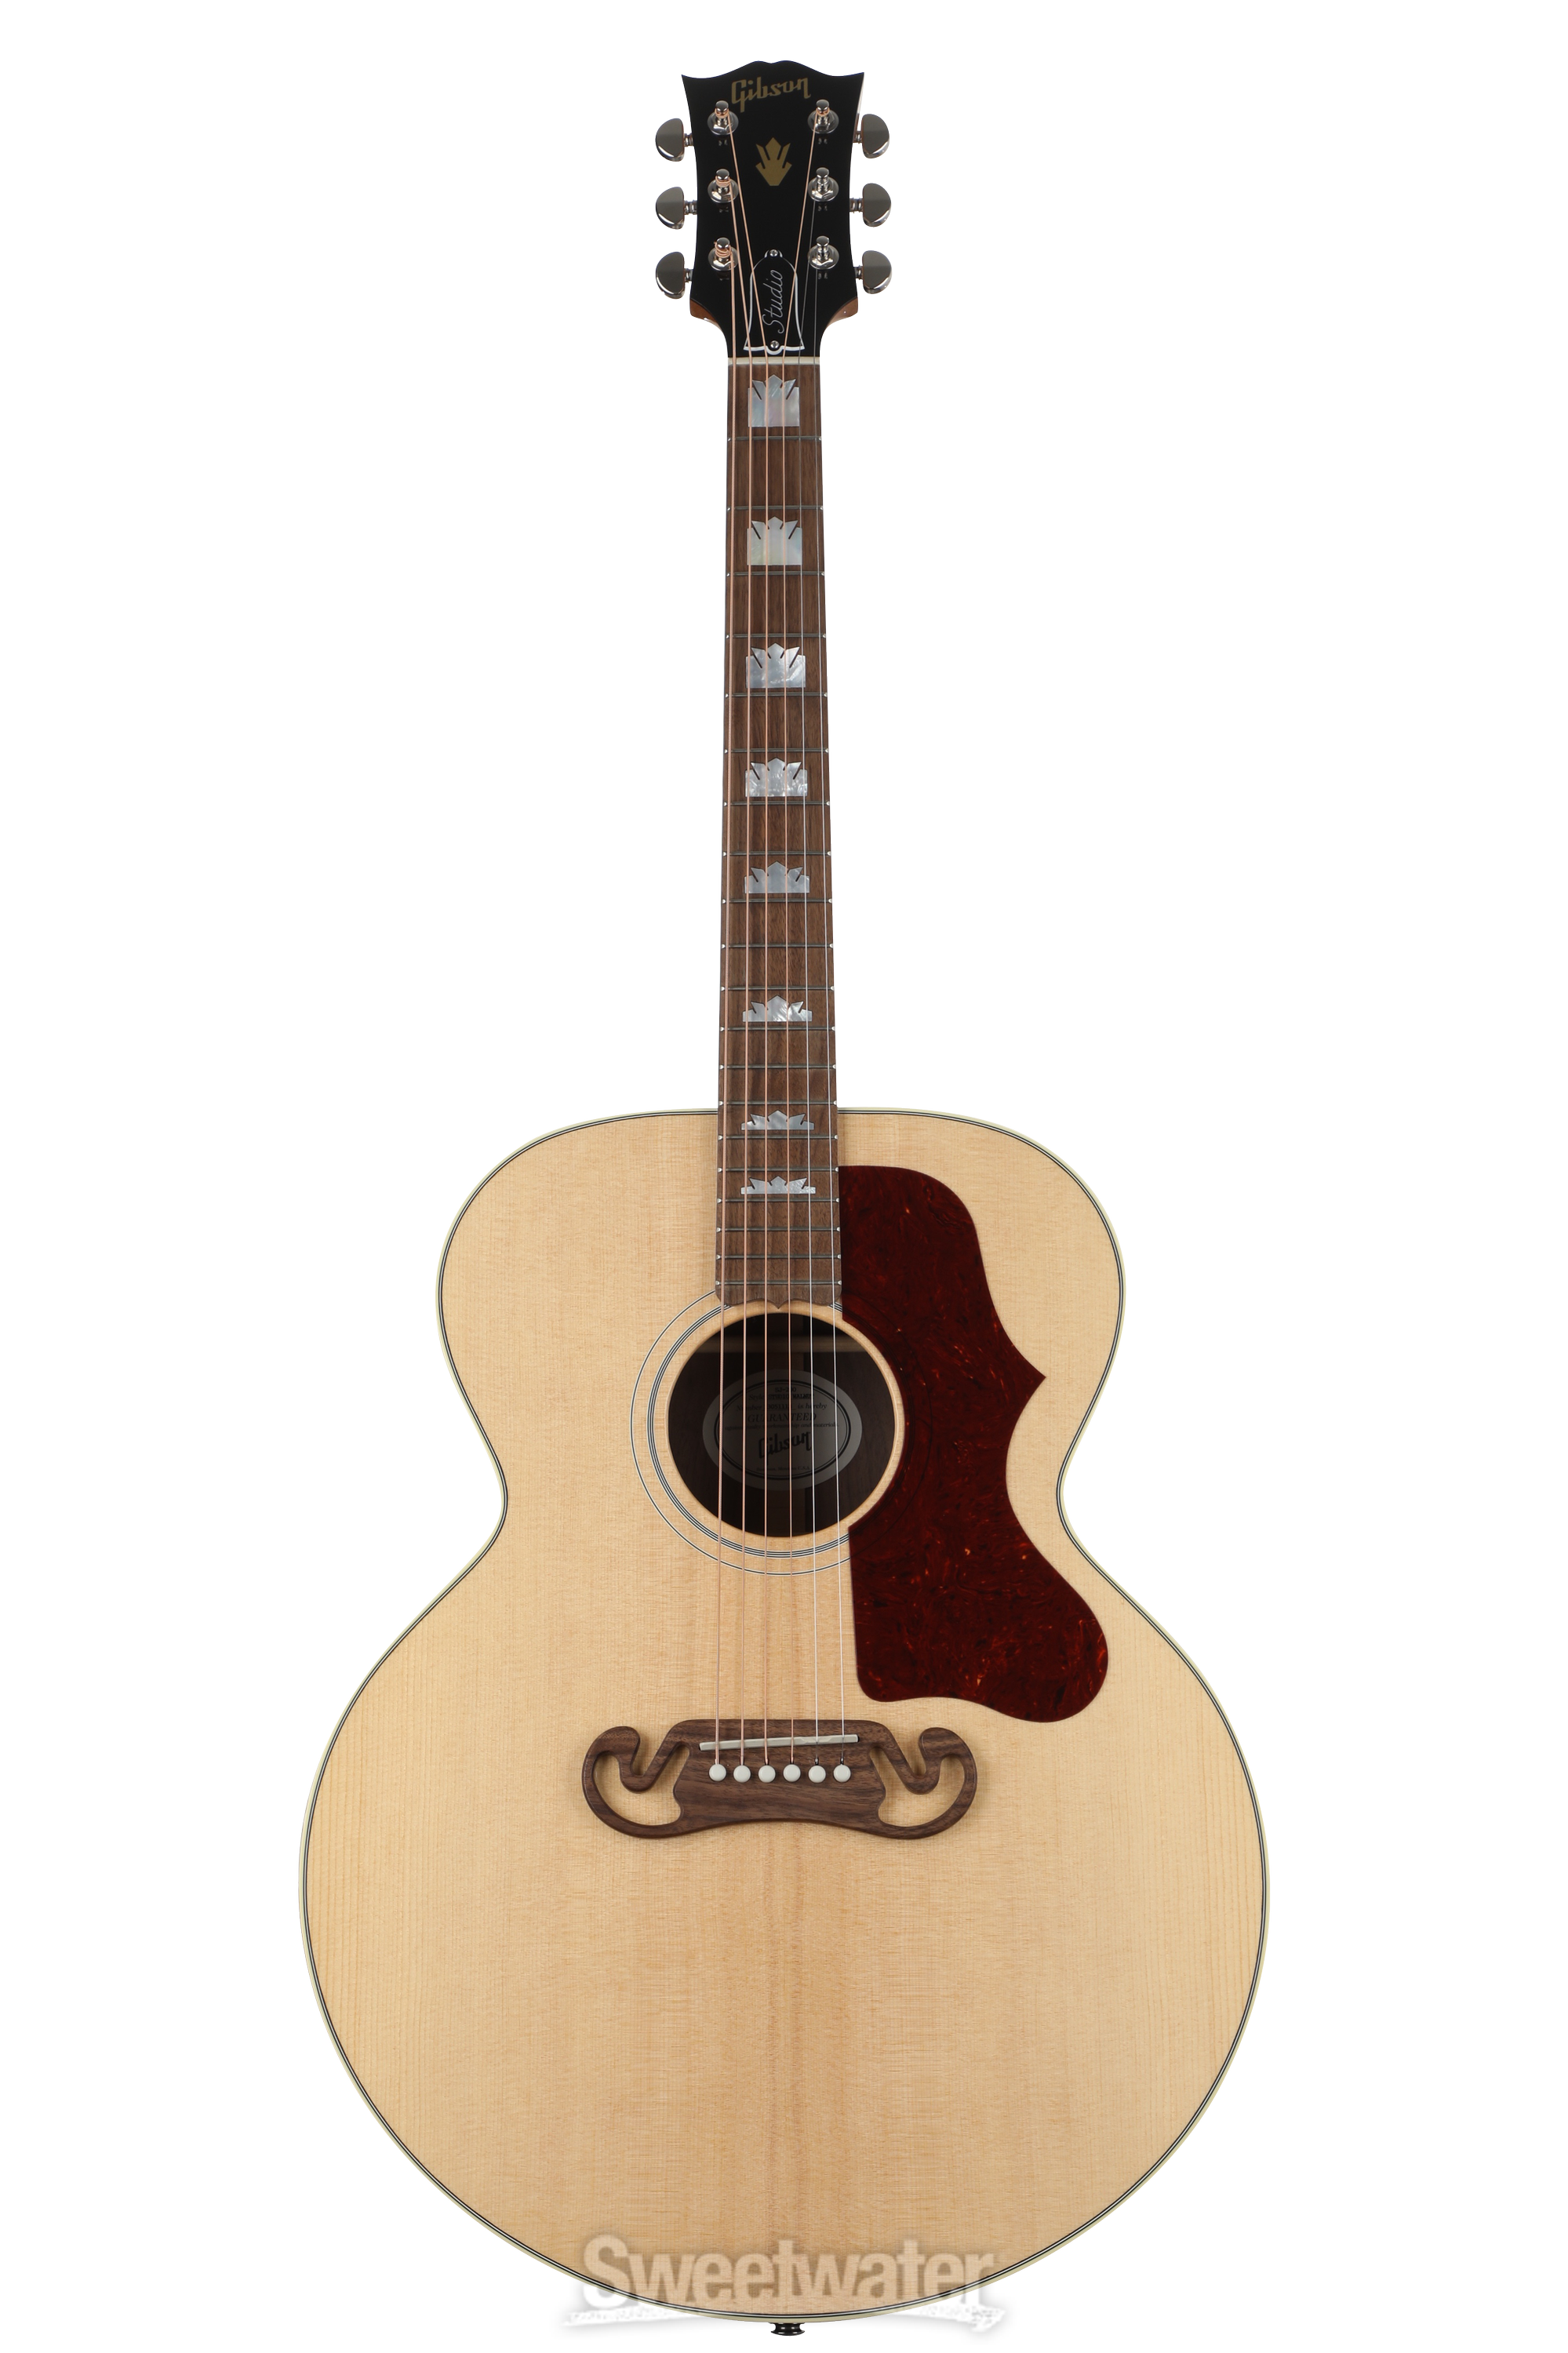 Gibson Acoustic SJ-200 Studio Walnut - Antique Natural | Sweetwater